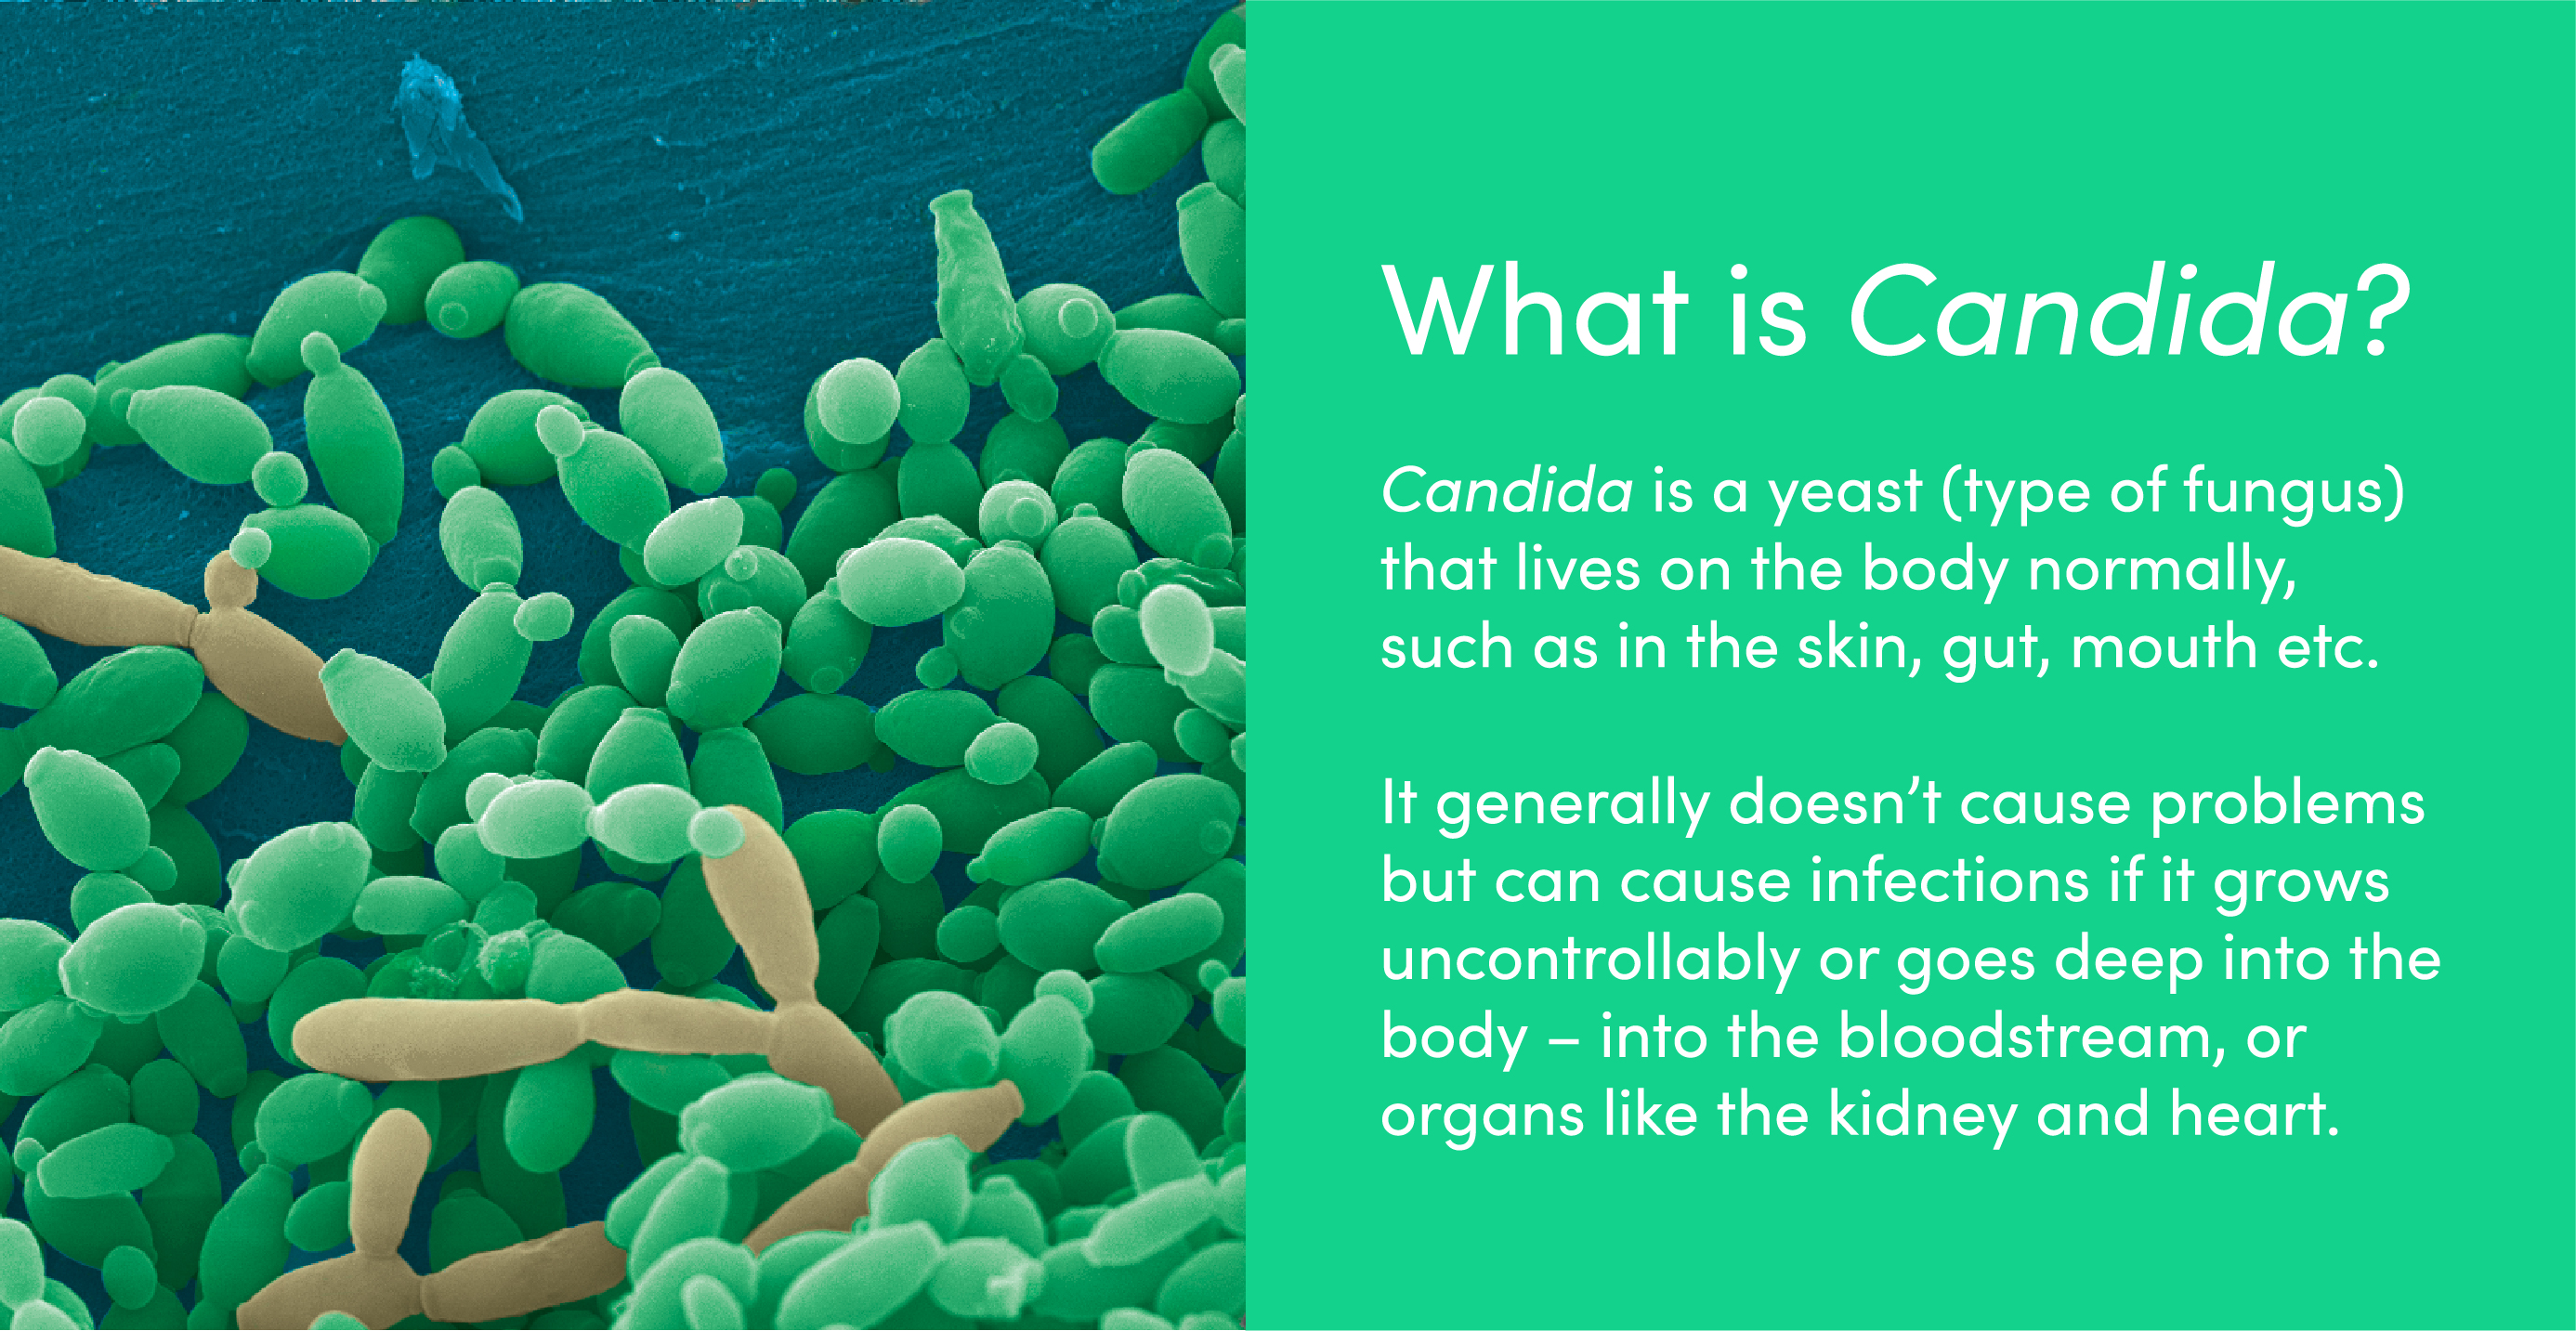 Candida is a yeast (type of fungus) that lives on the body normally. It generally doesn’t cause problems but can cause infections if it grows uncontrollably or goes deep into the body – into the bloodstream, or organs like the kidney and heart.